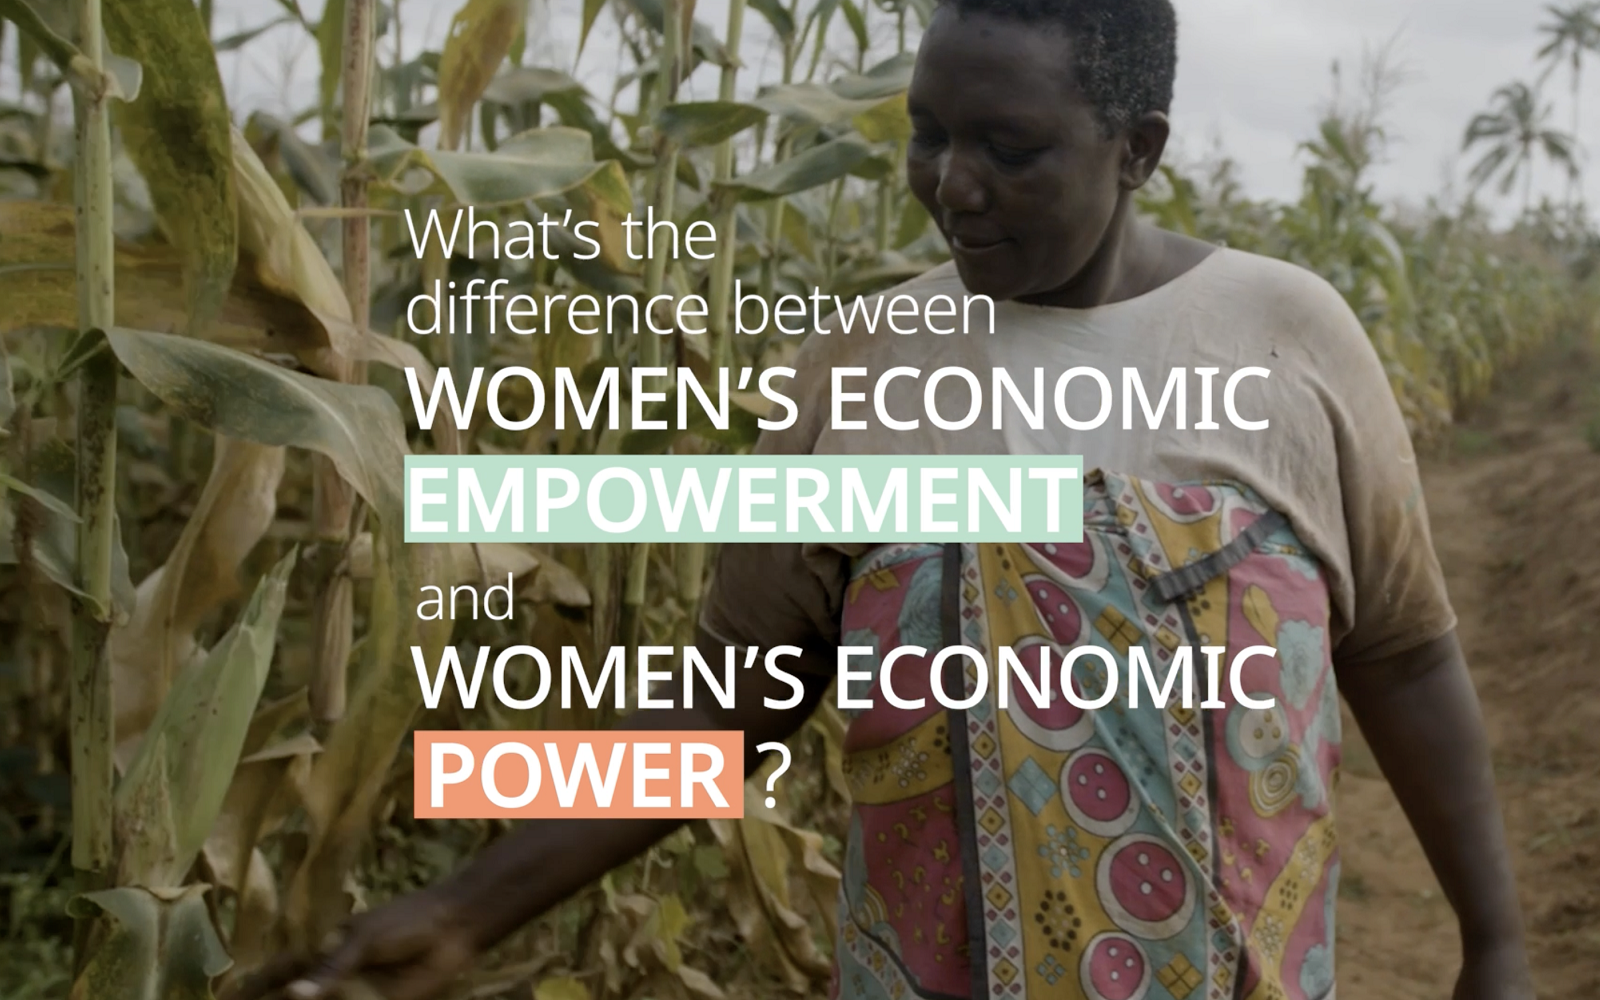 What's the difference between Women's Economic Empowerment and Women's Economic Power?